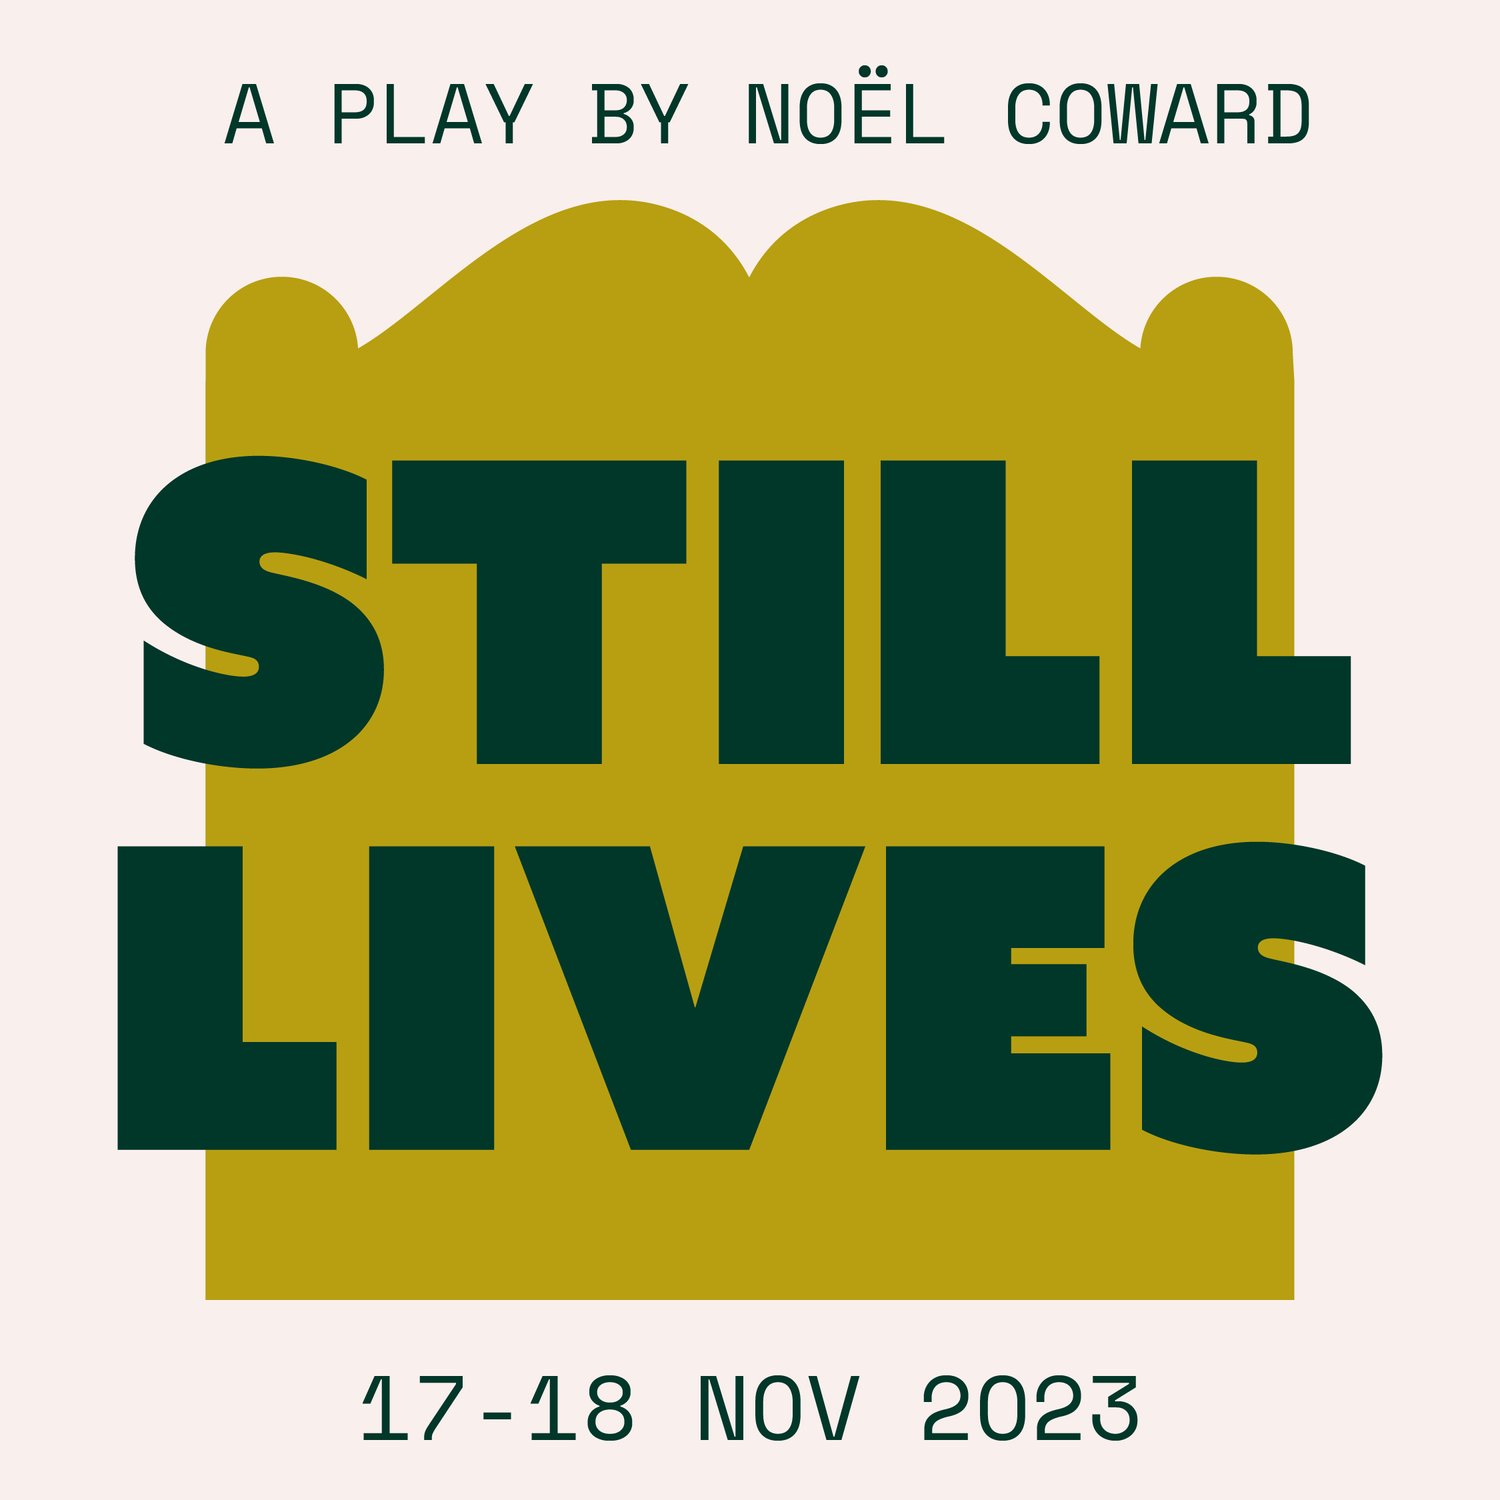 poster for 'A play by Noël Coward: Still Lives 17-18 November 2023'